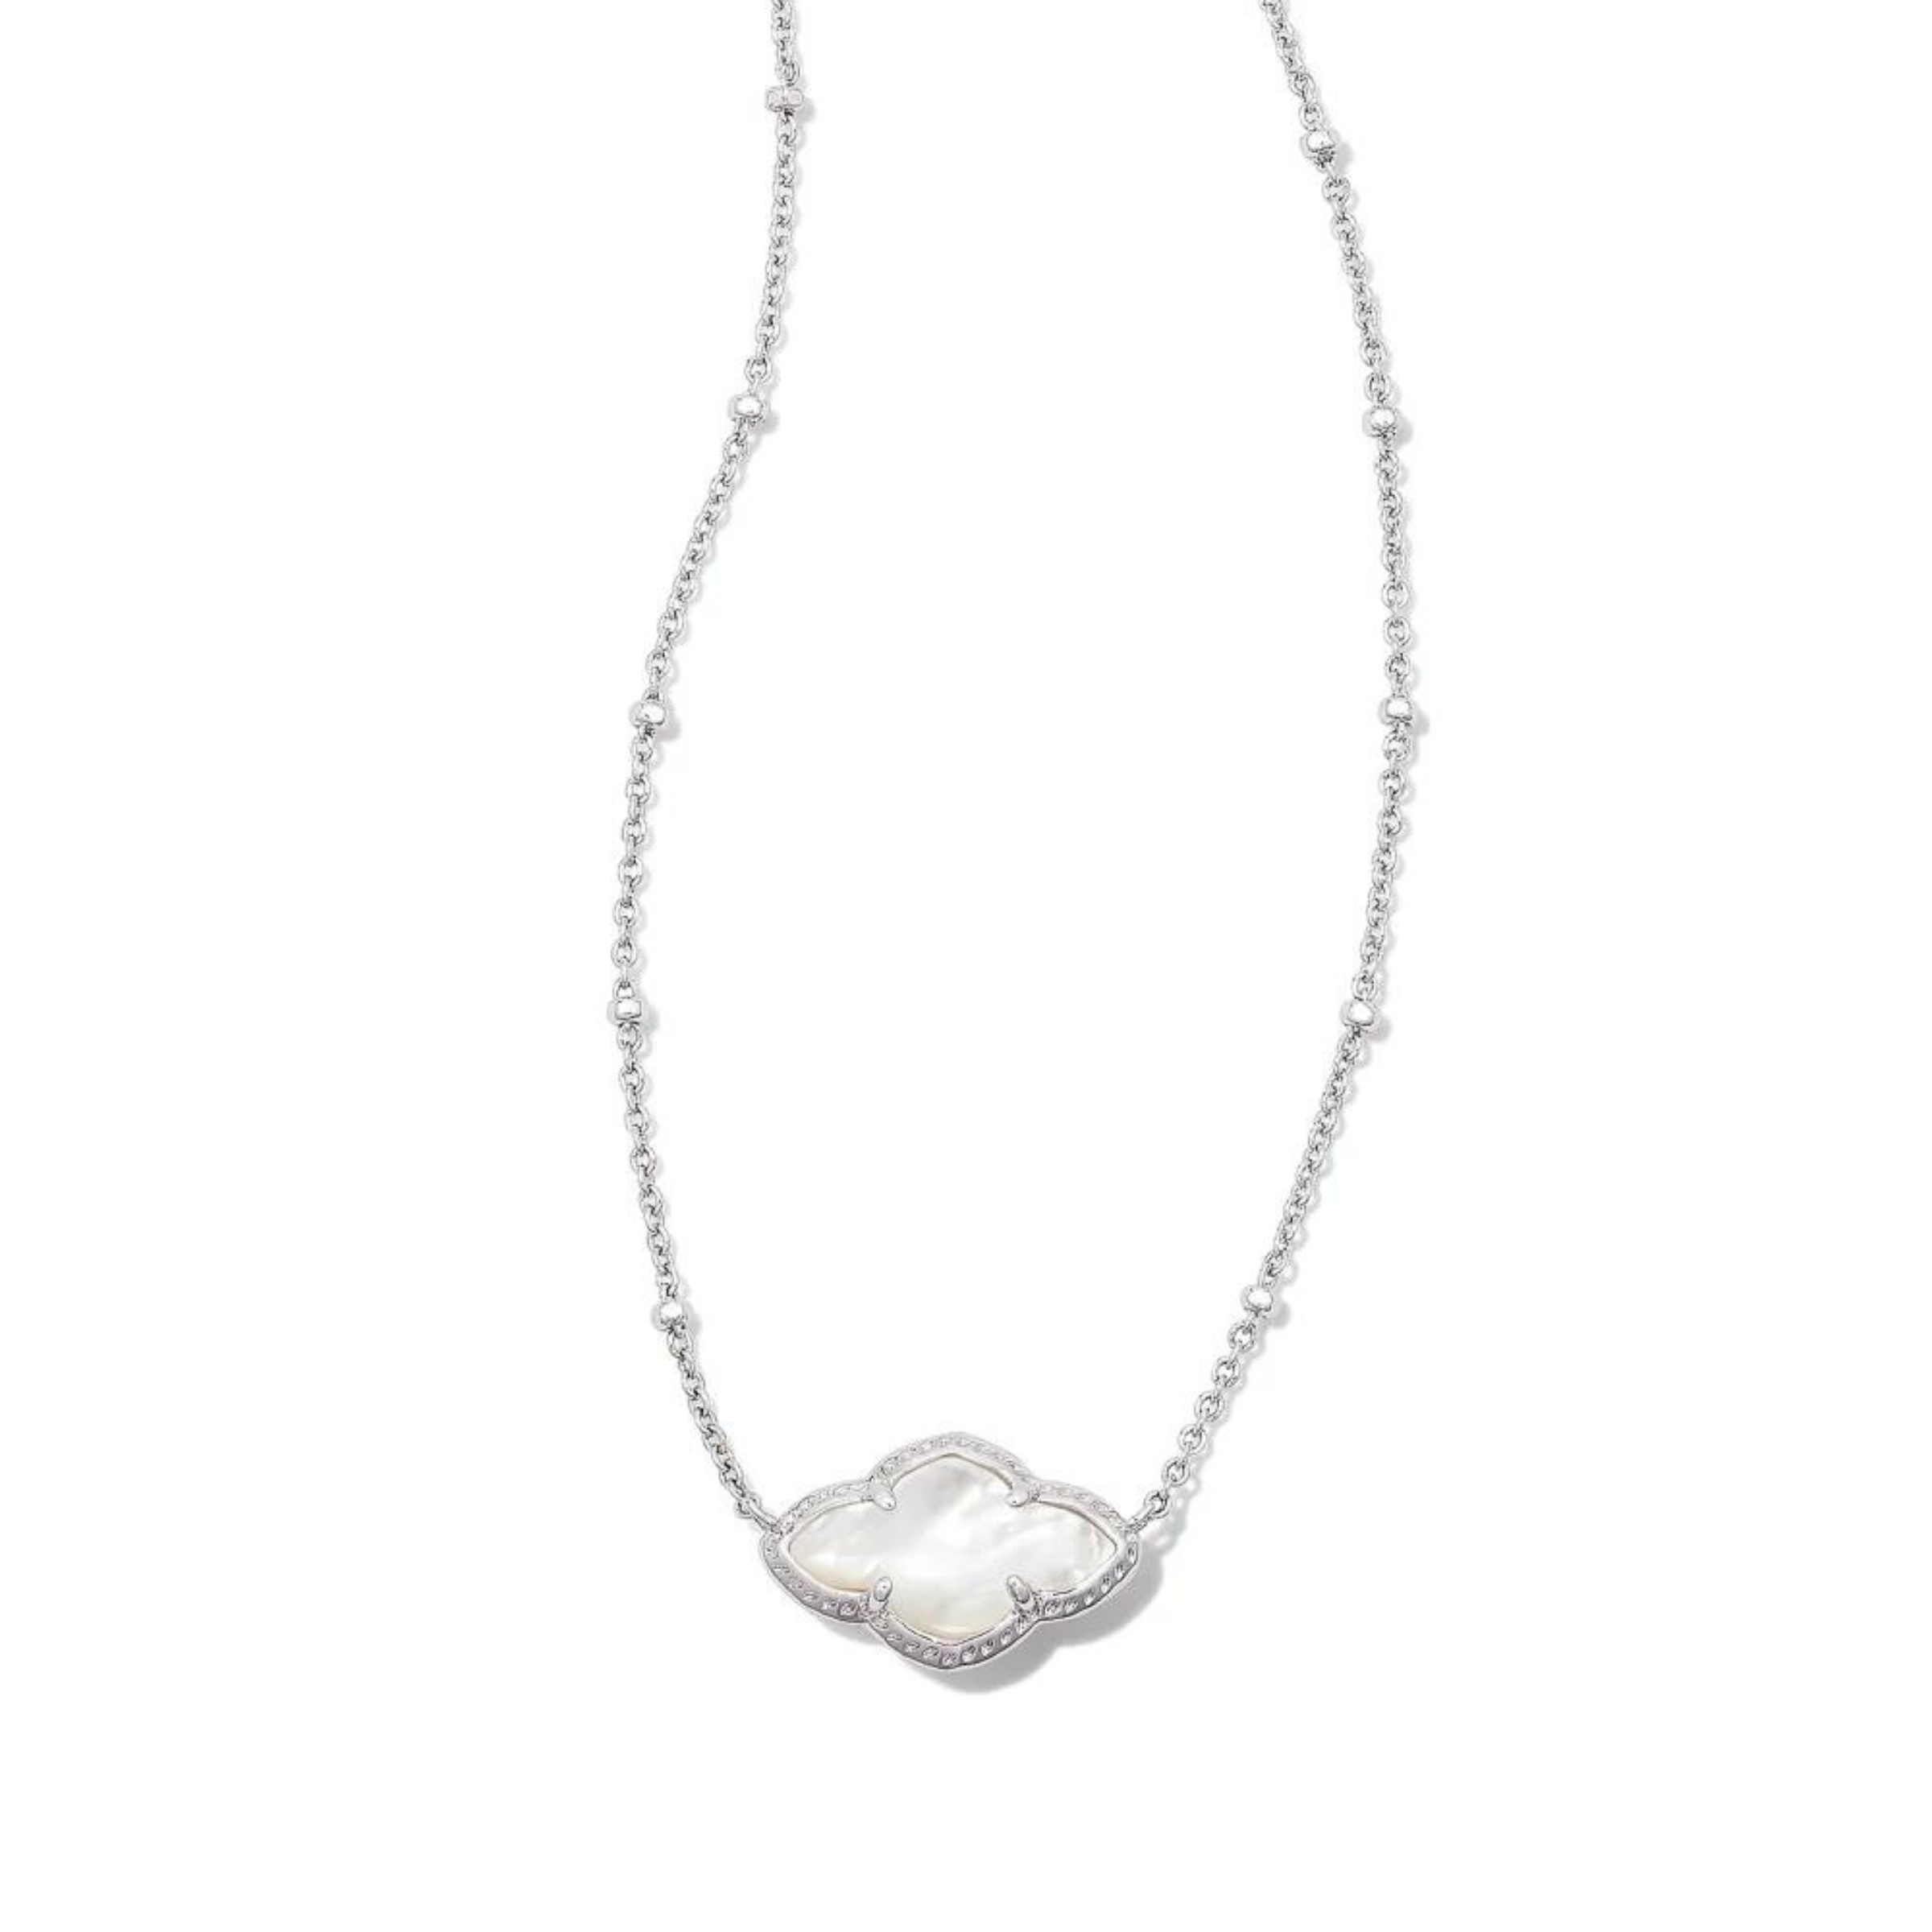 Kendra Scott | Abbie Necklace in Silver - Giddy Up Glamour Boutique